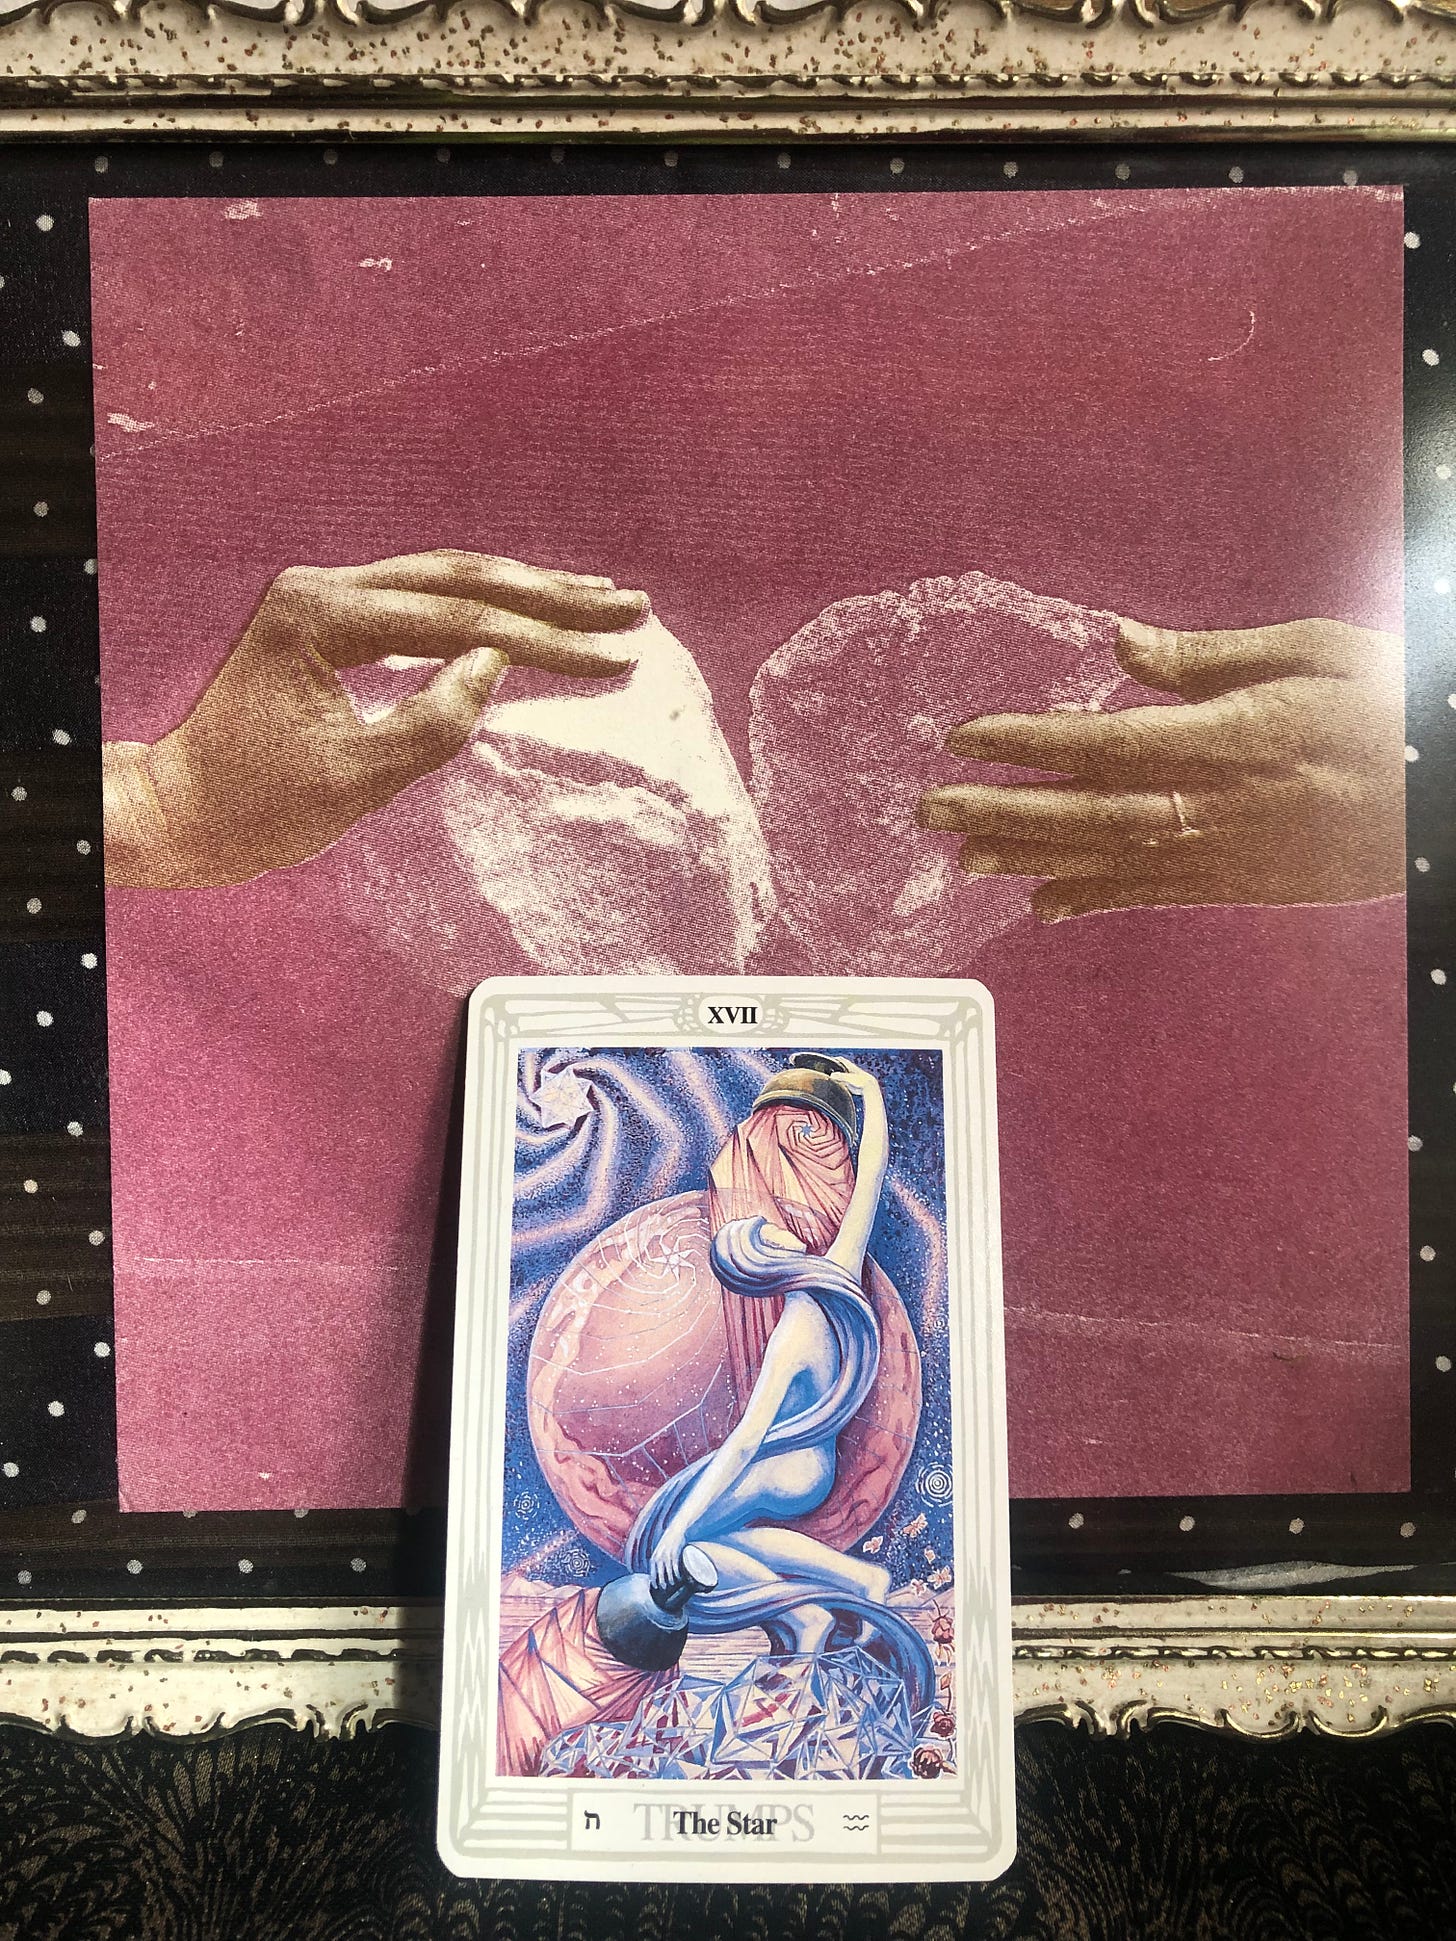 the star tarot card from the thoth deck rests against a framed art piece of two hands each holding a stone with the two stones touching in the center. 